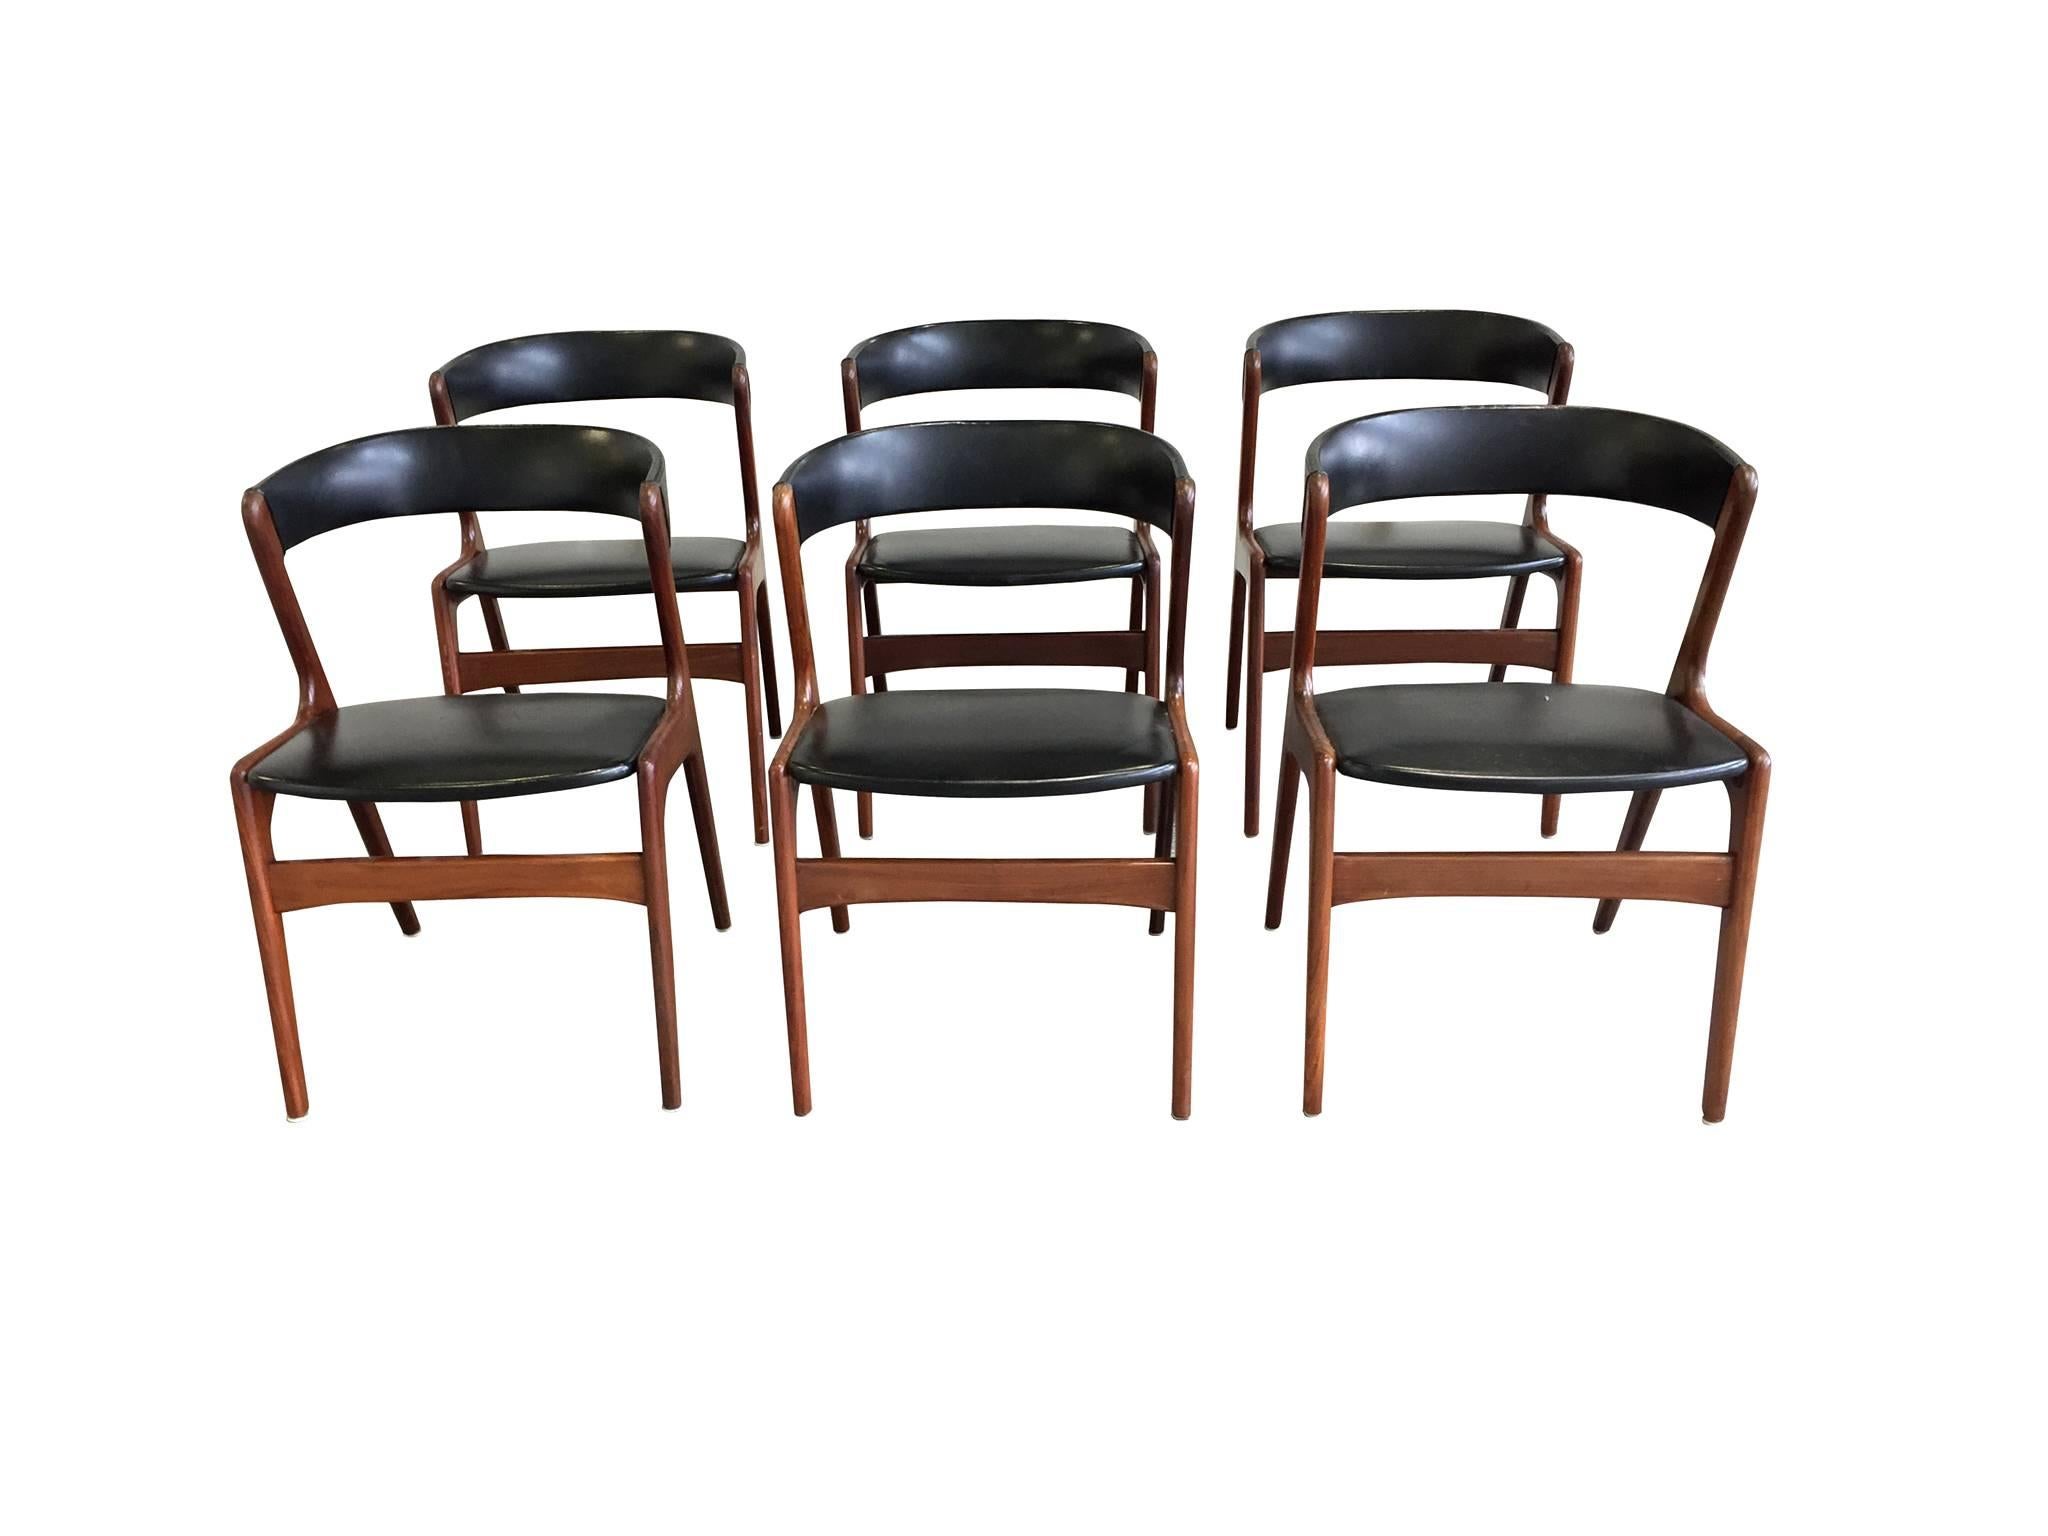 These six Danish modern side chairs were designed and manufactured by Omann Jun, circa 1950s-1960s. They are comprised of teak frames in a dark finish and black skai upholstery. This minimal combination of bold colors is really beautiful. It